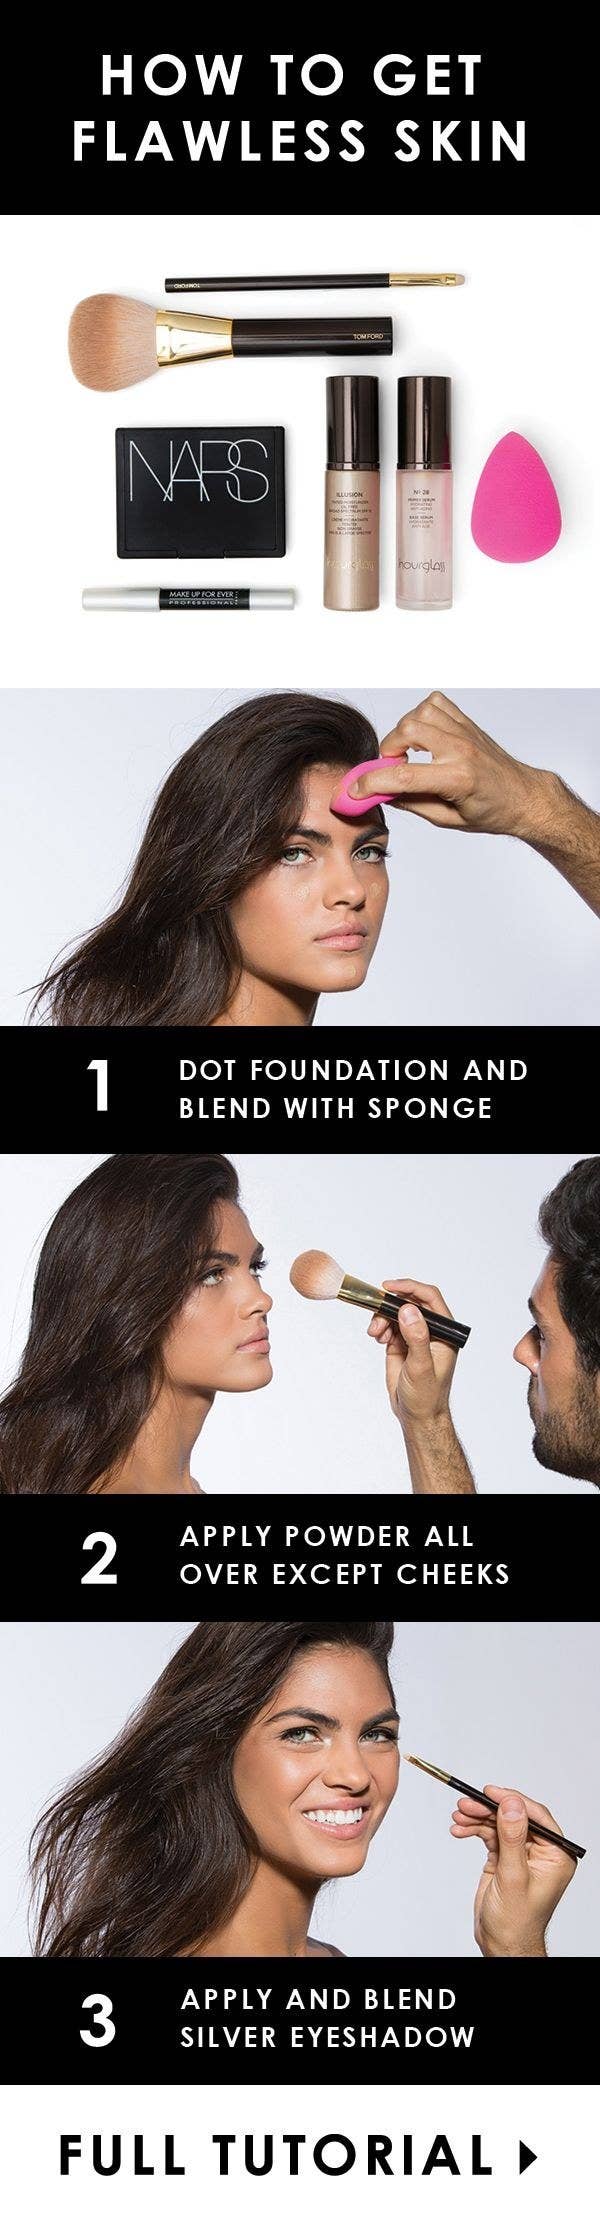 The pink sponge, known as a beauty blender is a favorite of amateurs and pros alike. Learn how to get this flawless look HERE.